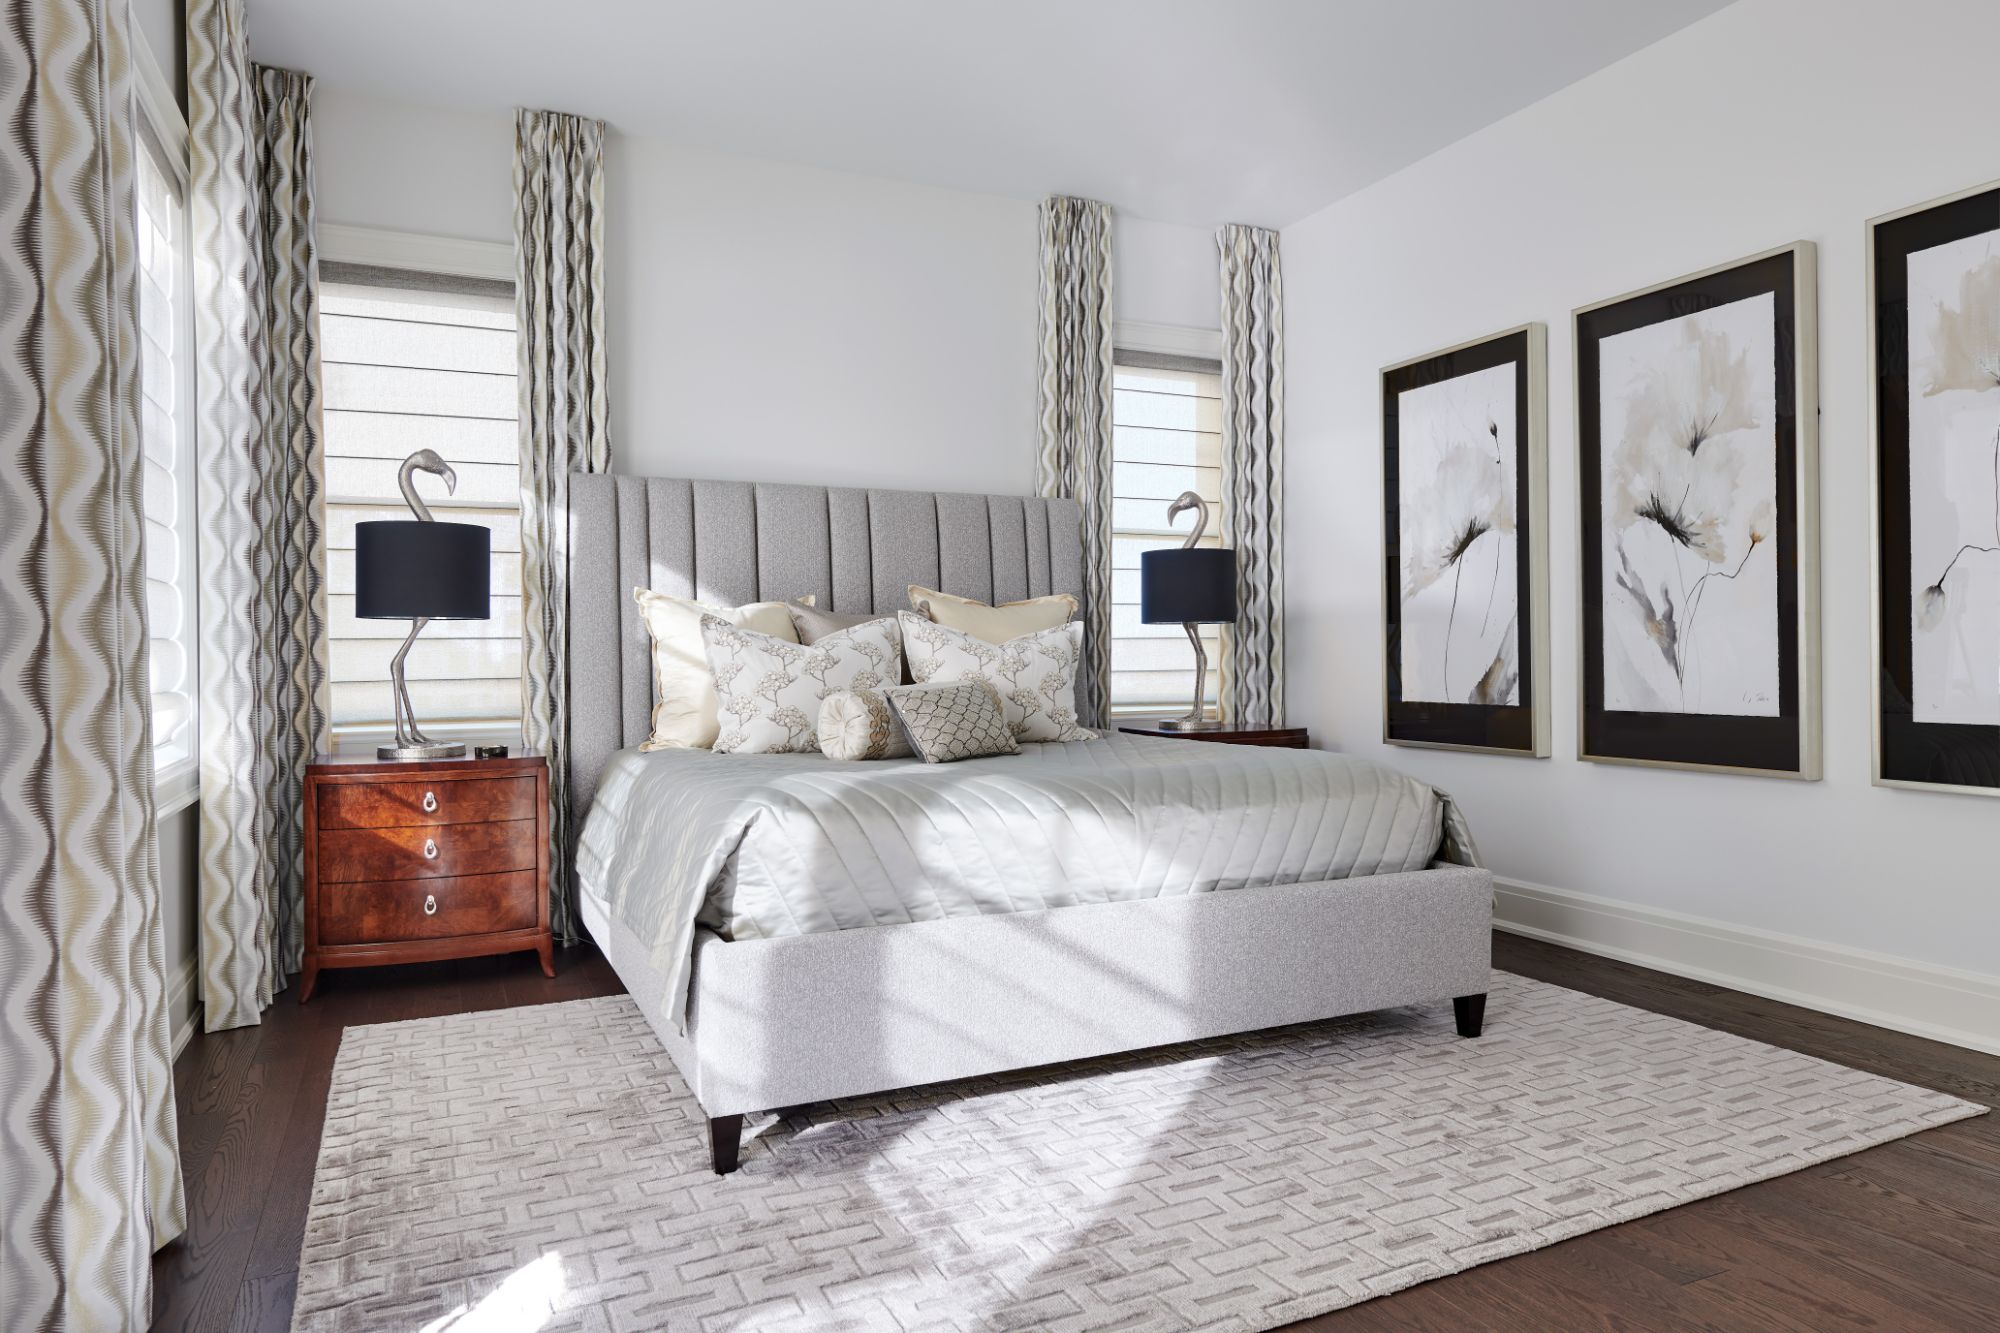 Upgrading The Guest Room: 5 Things You Need To Know